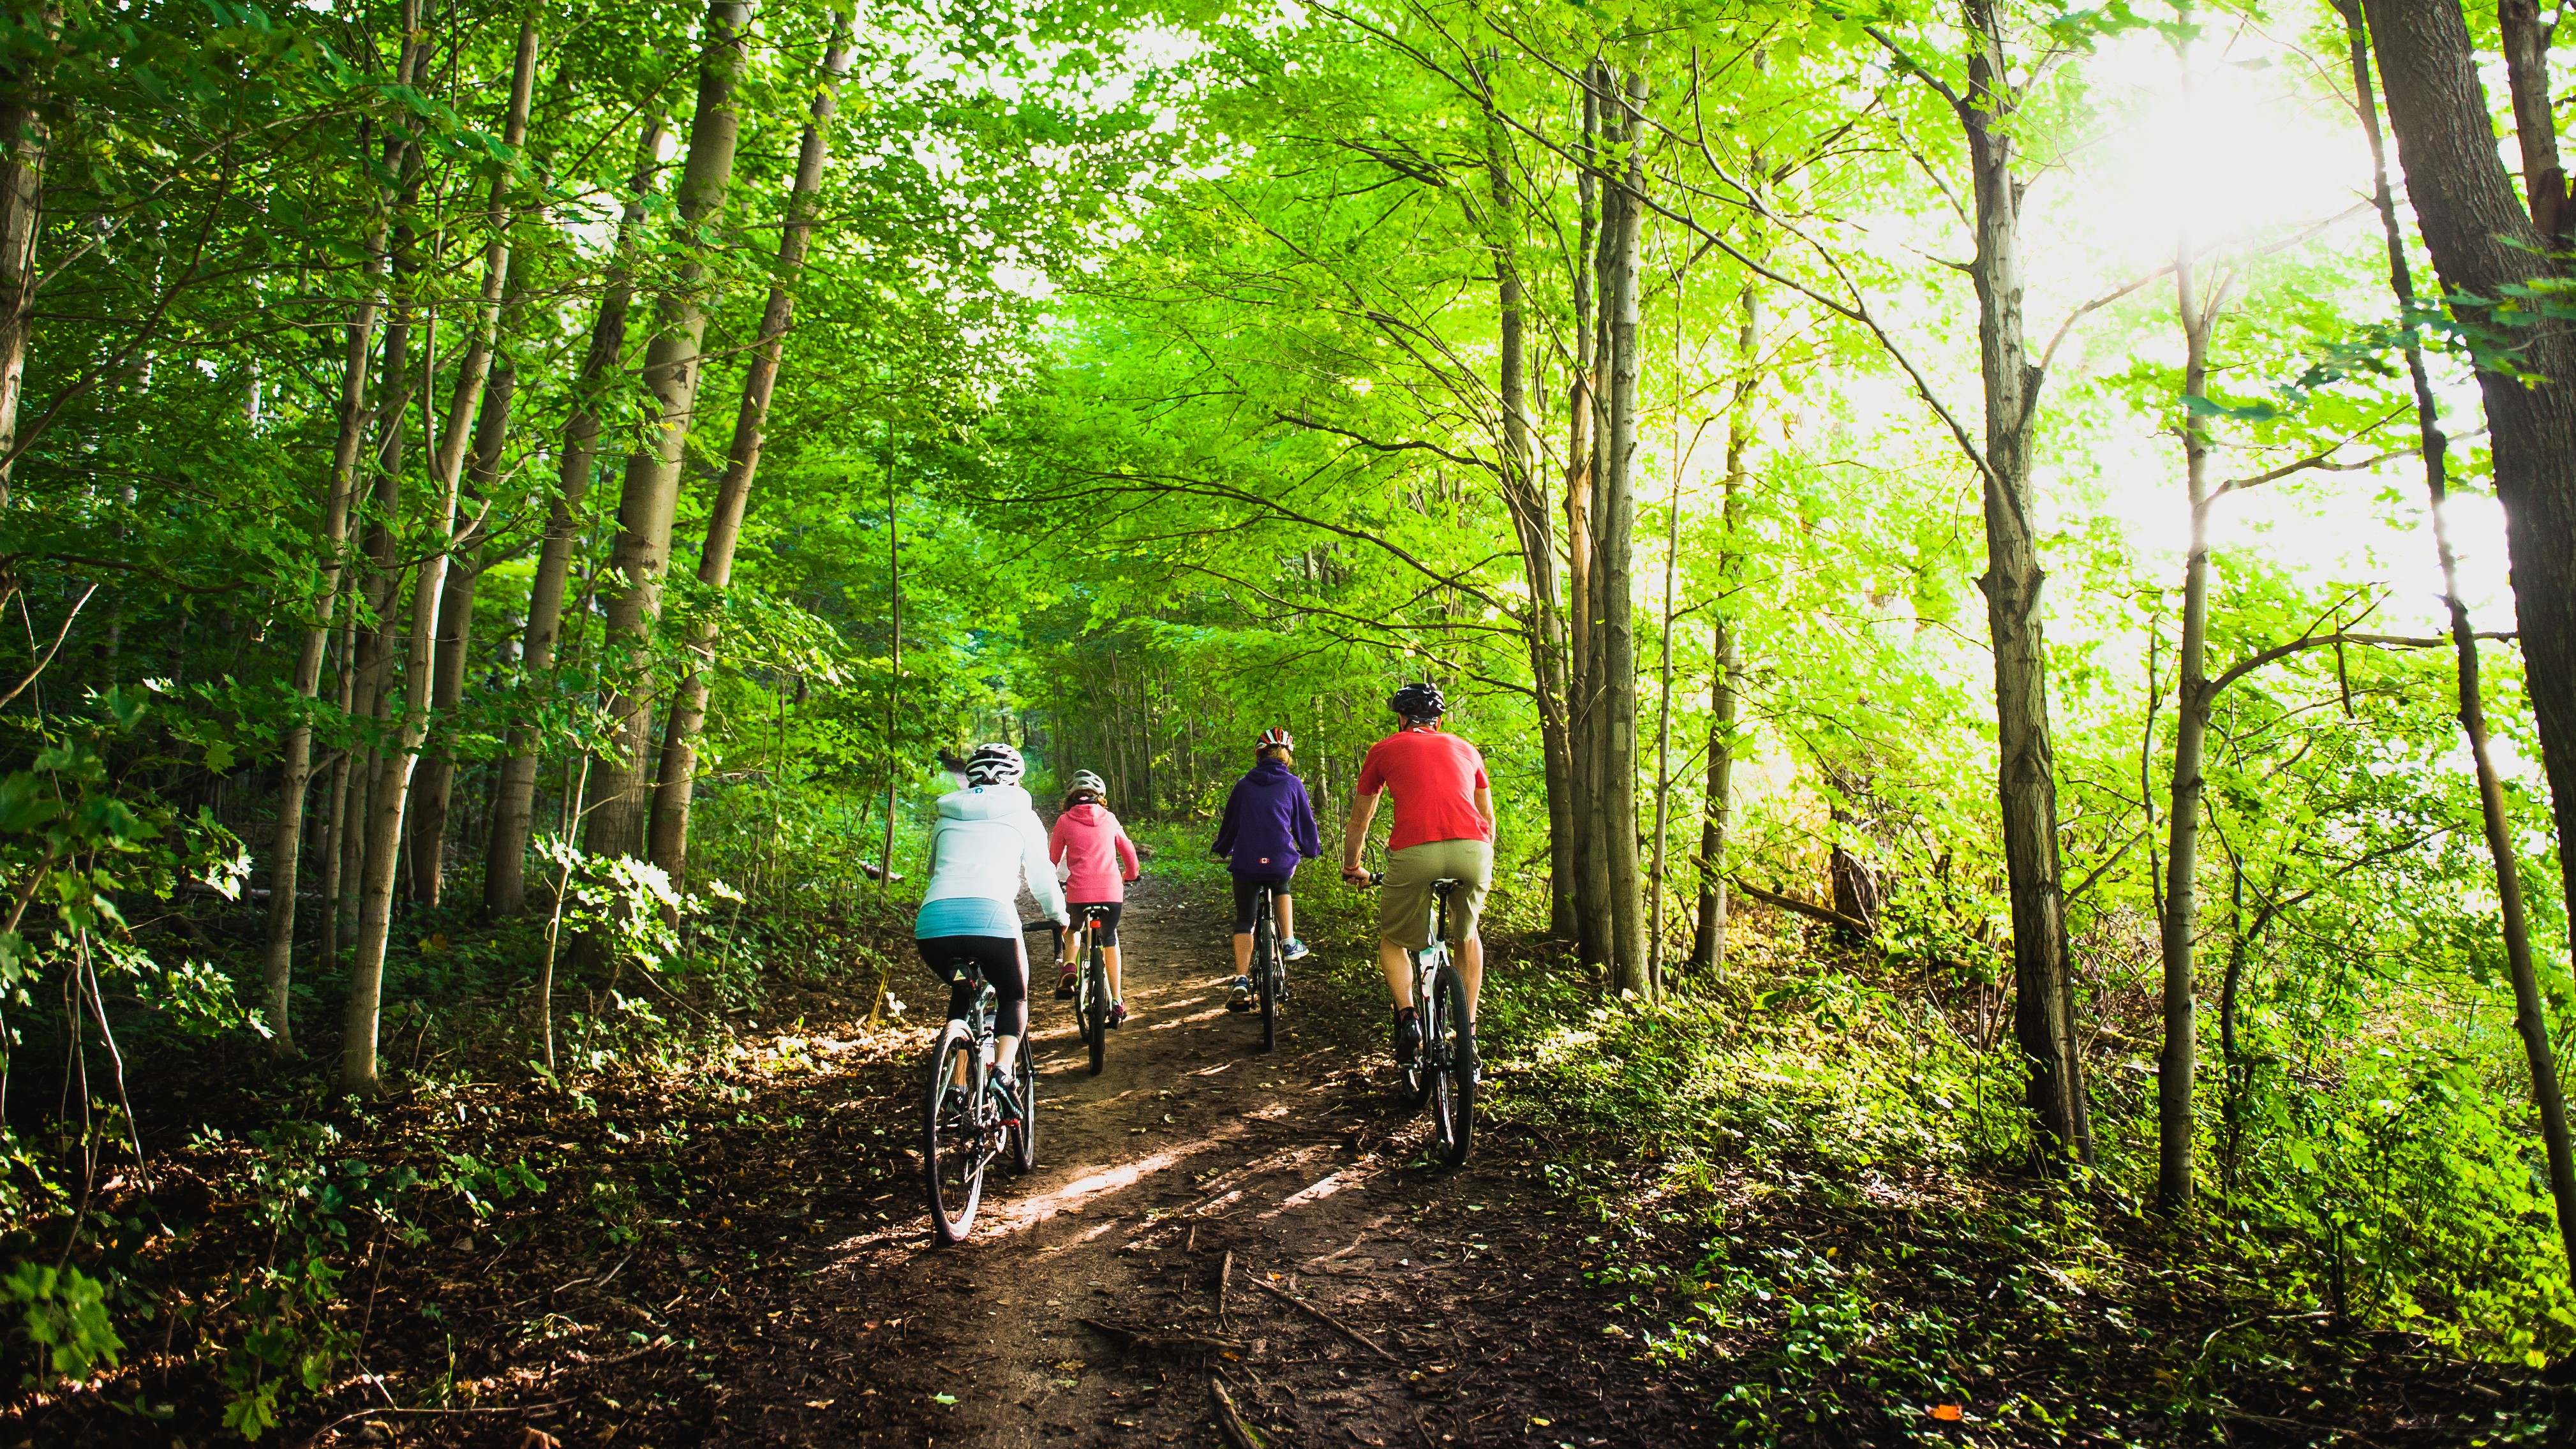 Family of four riding bikes along a trail surrounded by green trees